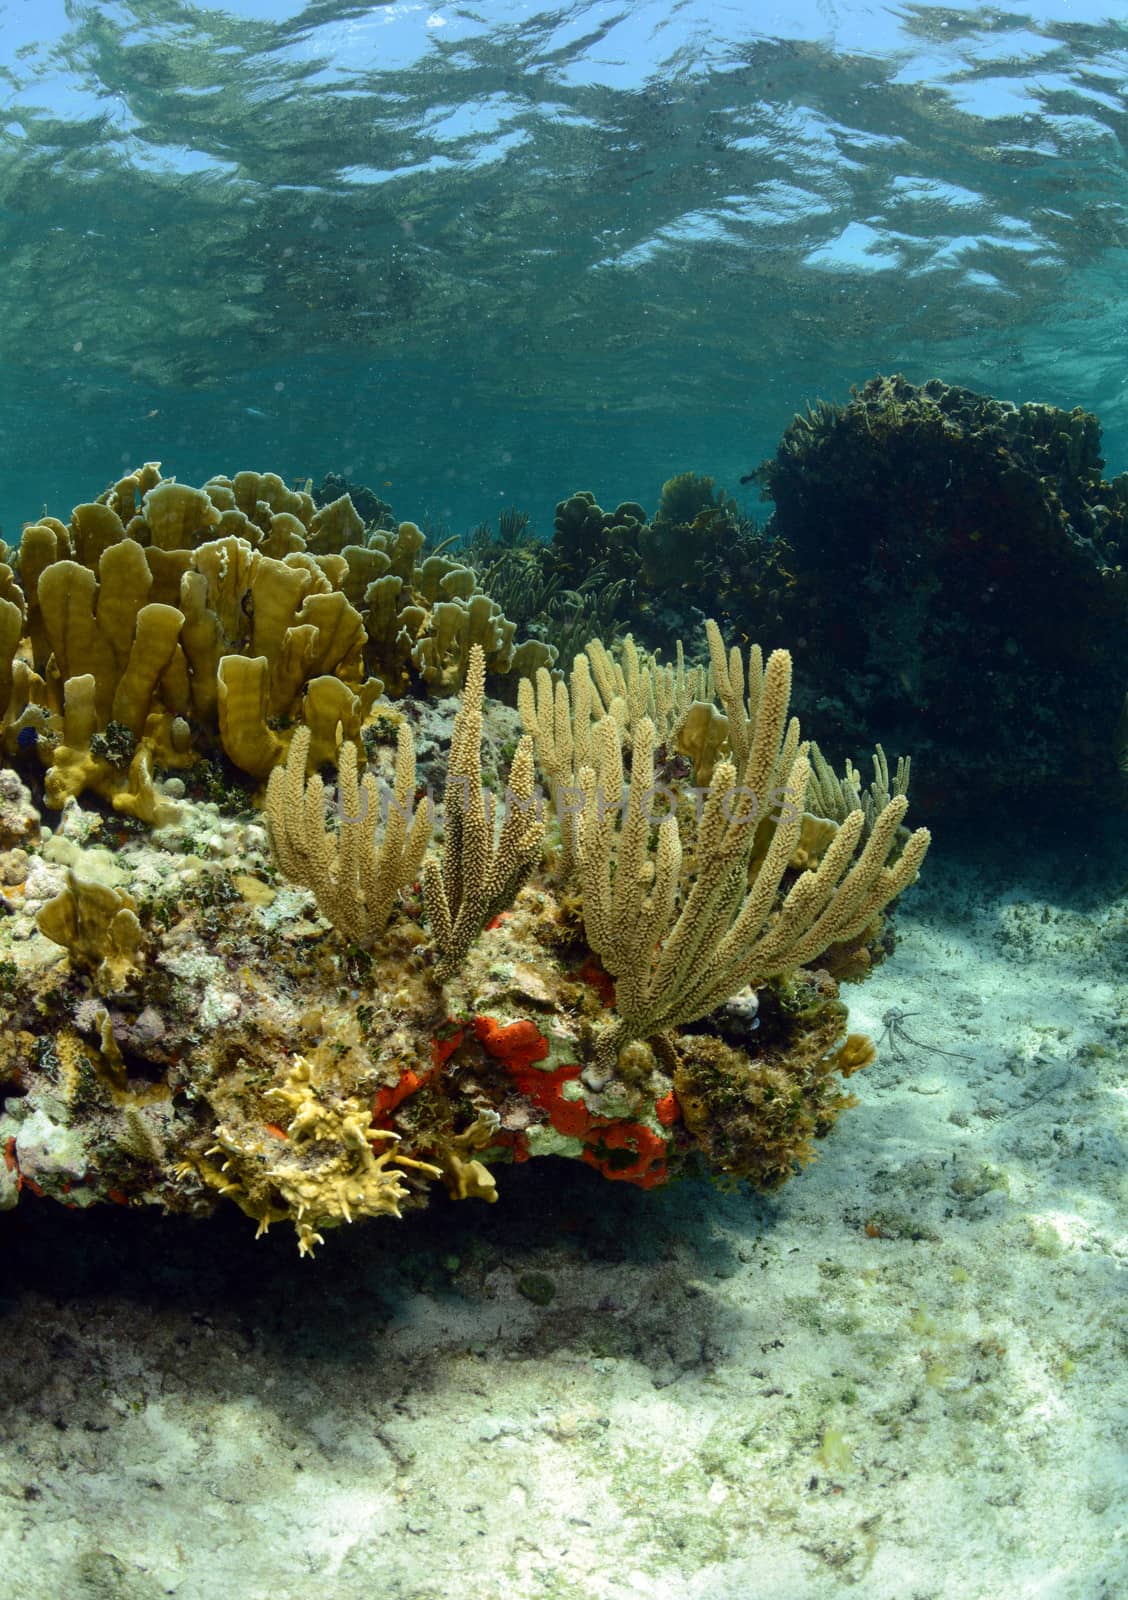 Coral and sea life in a beautiful underwater seascape by ftlaudgirl